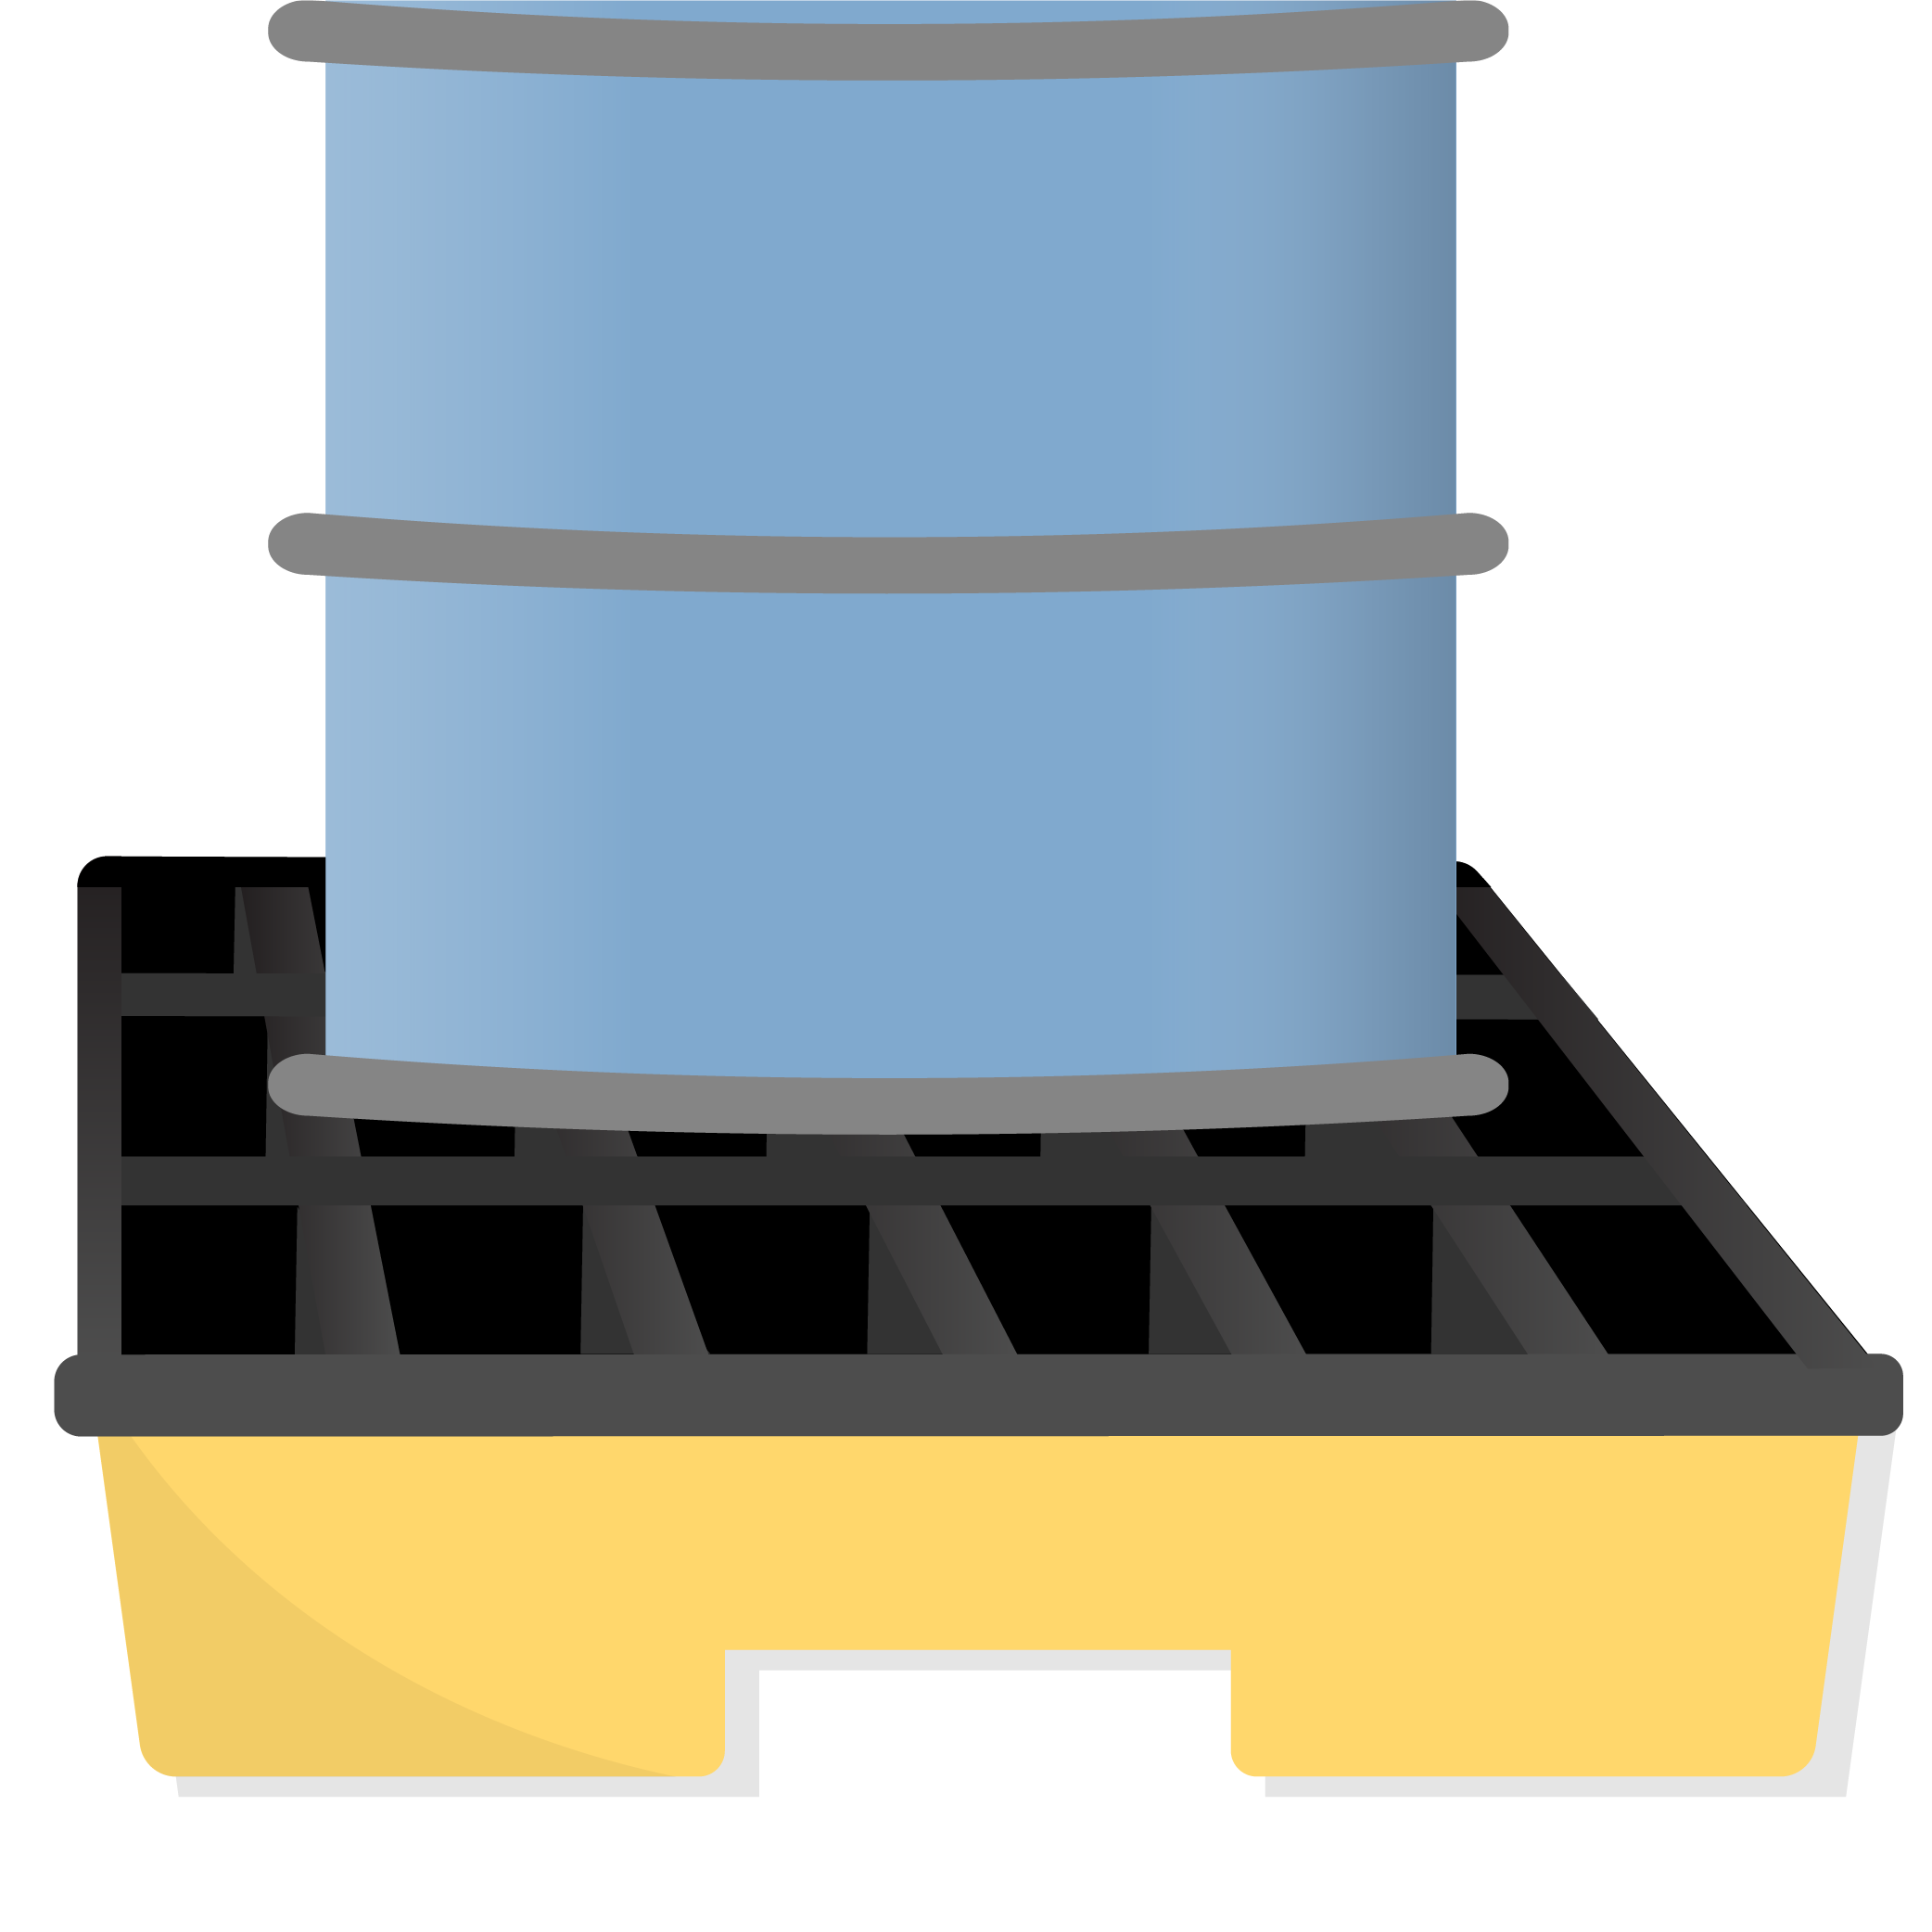 Secondary containment. A drum sitting on top of a containment pallet.